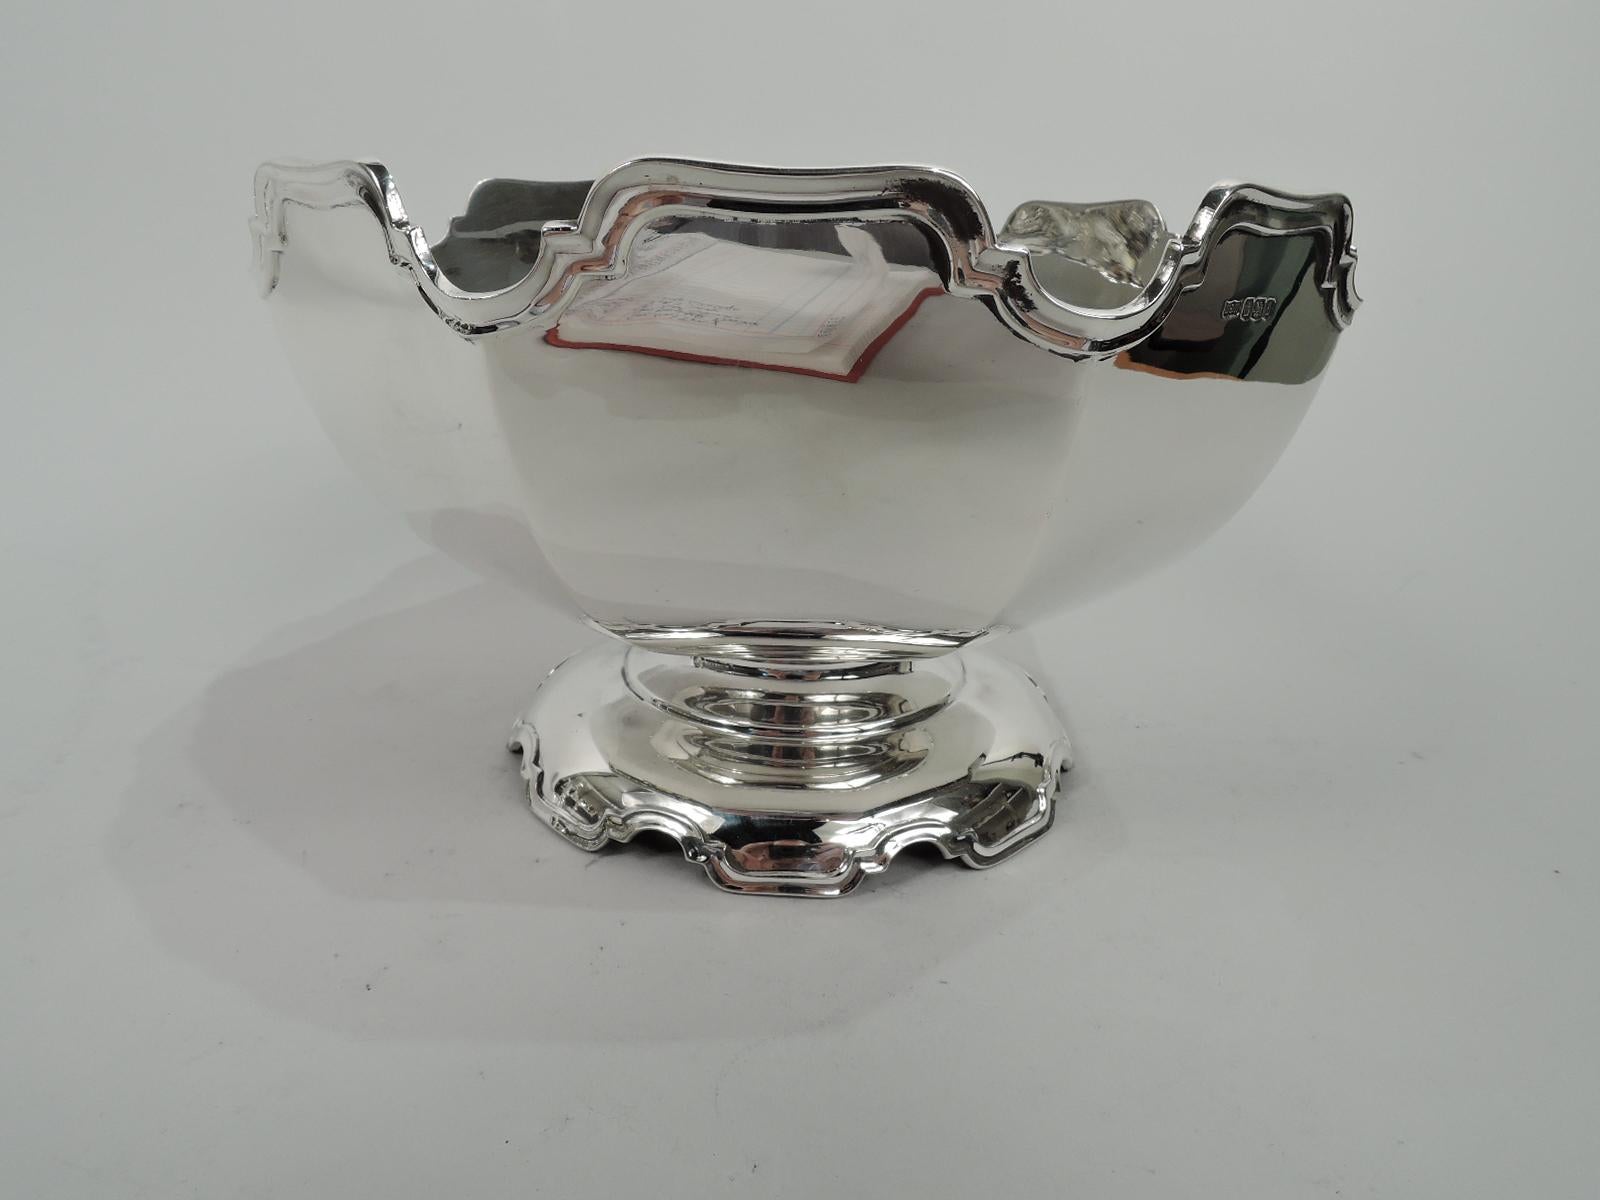 George V sterling silver bowl. Made by Mappin & Webb in Sheffield in 1923. Faceted and curved with monteith-style molded curvilinear rim. Foot raised with same. Fully marked including design no. 606564, which was registered in 1912. Weight: 21.8